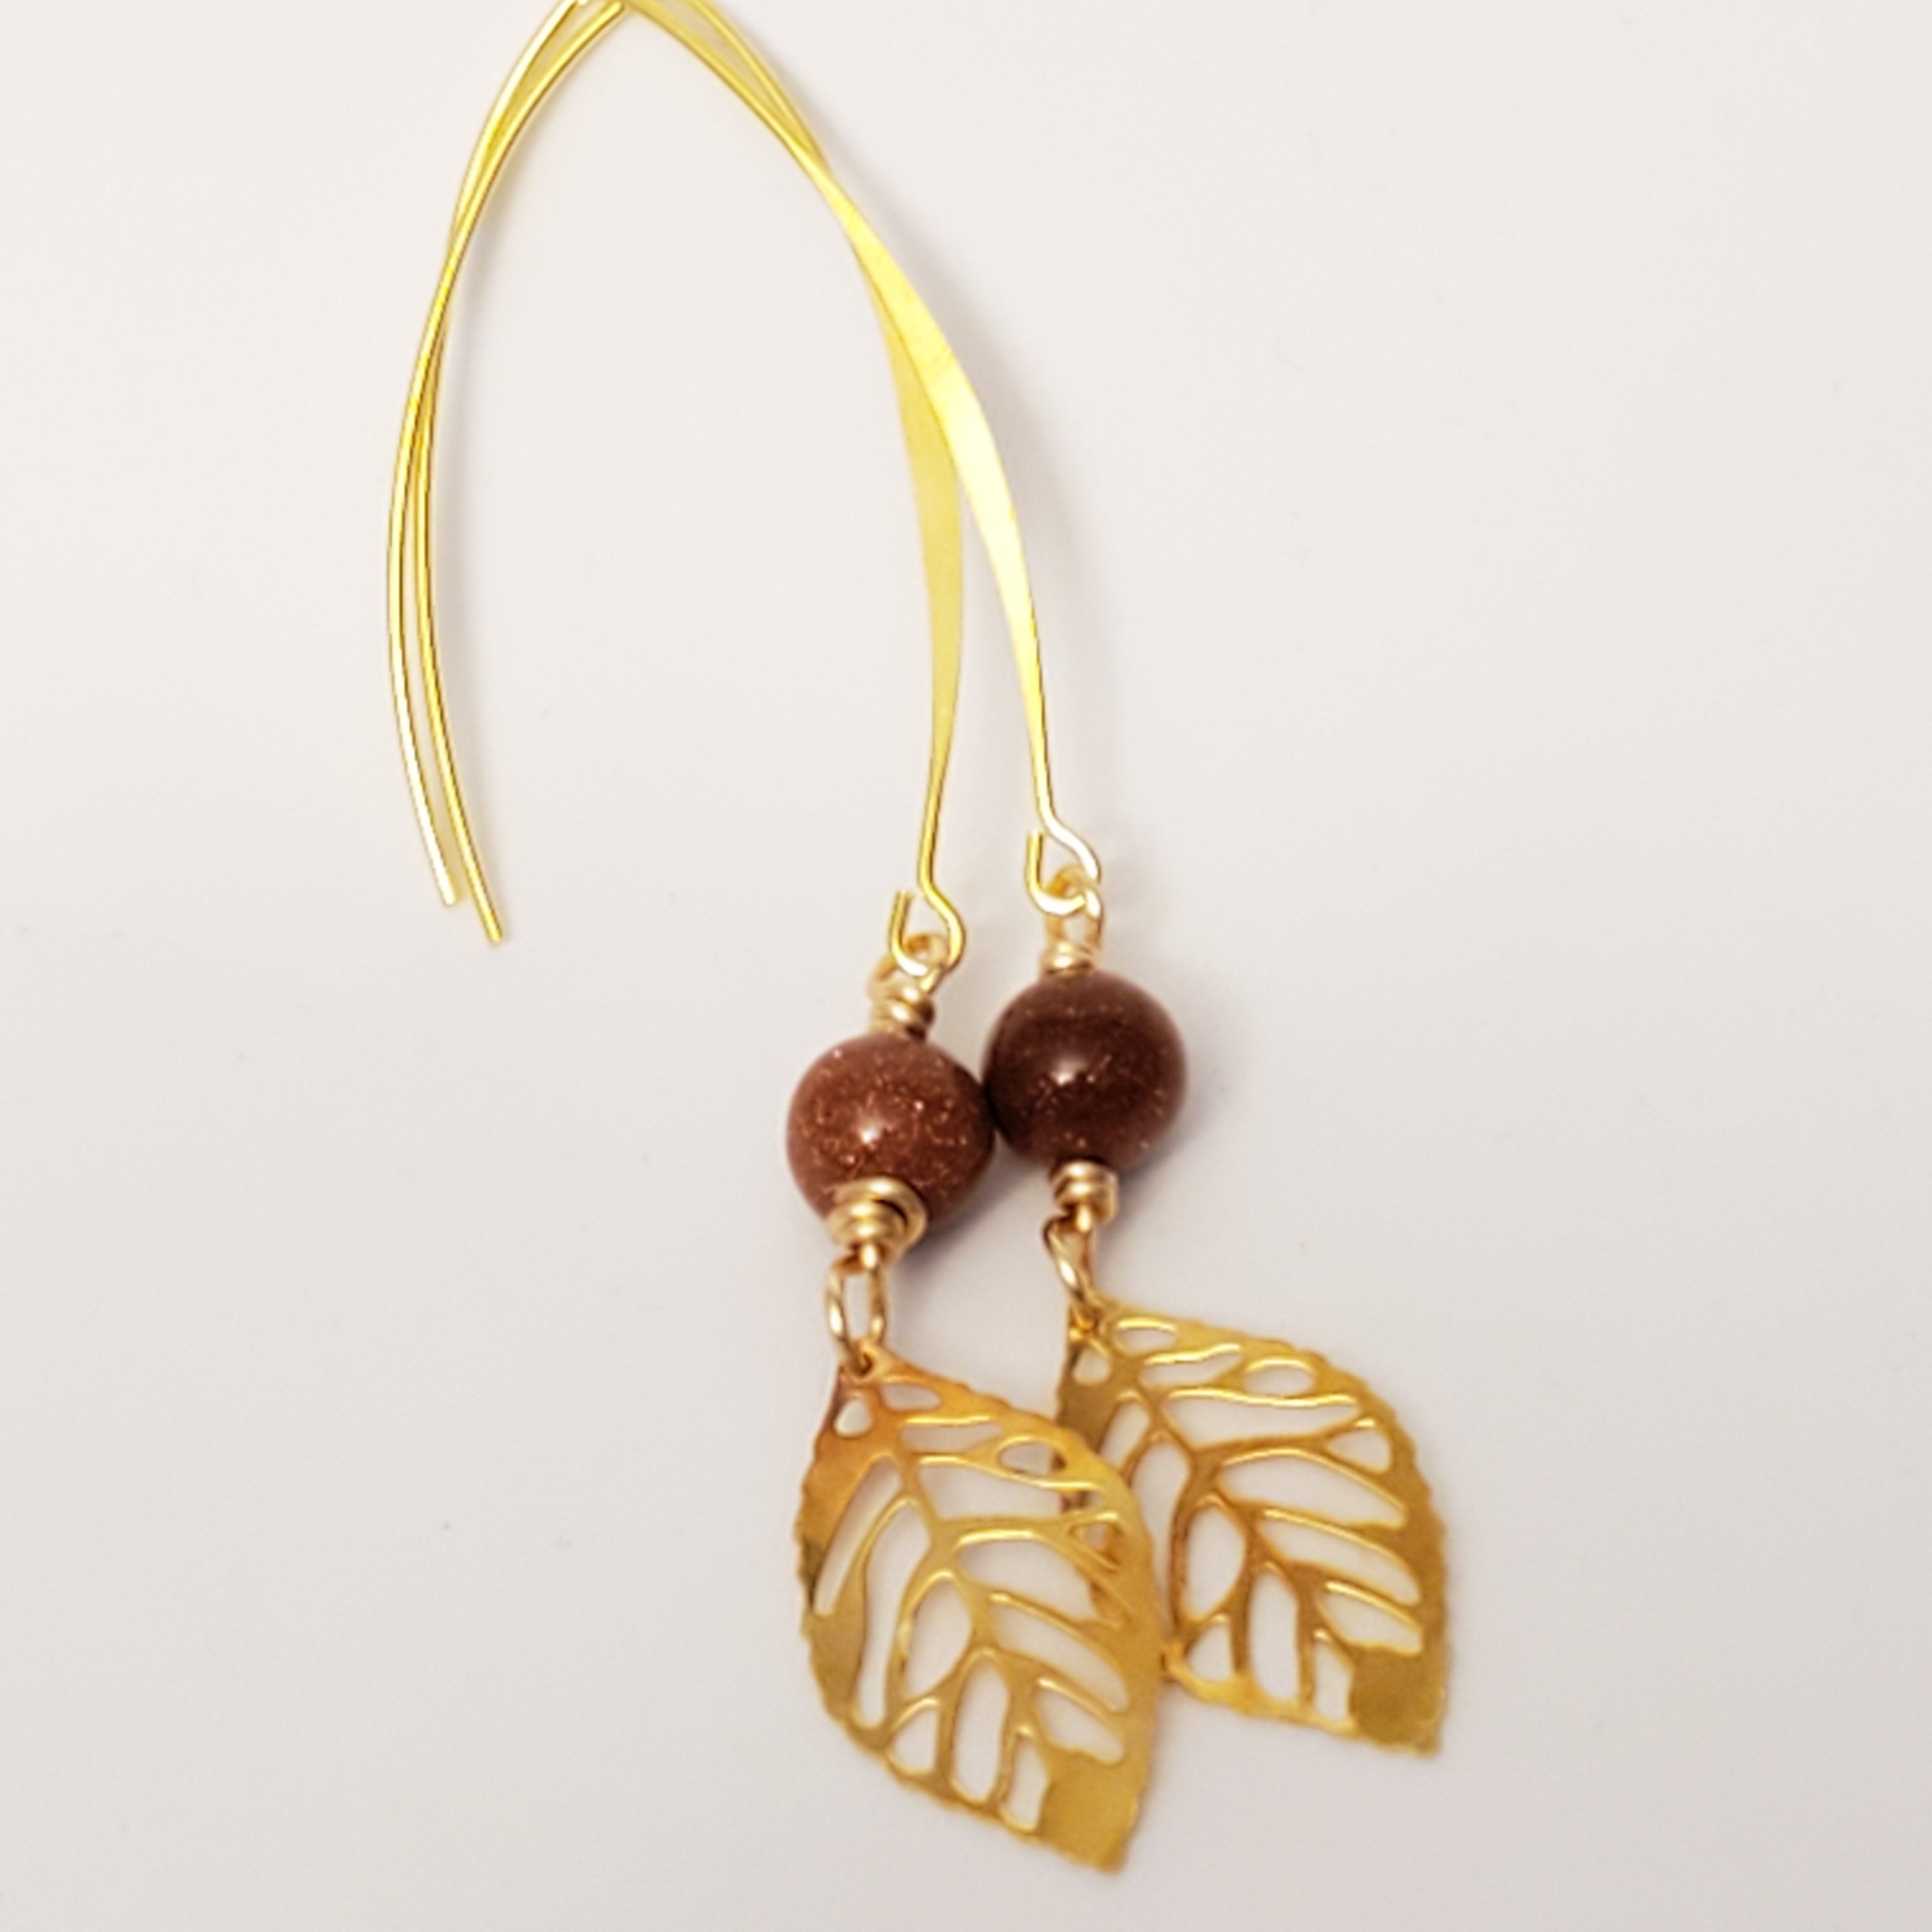 Gold leaf drop earrings with sandstone